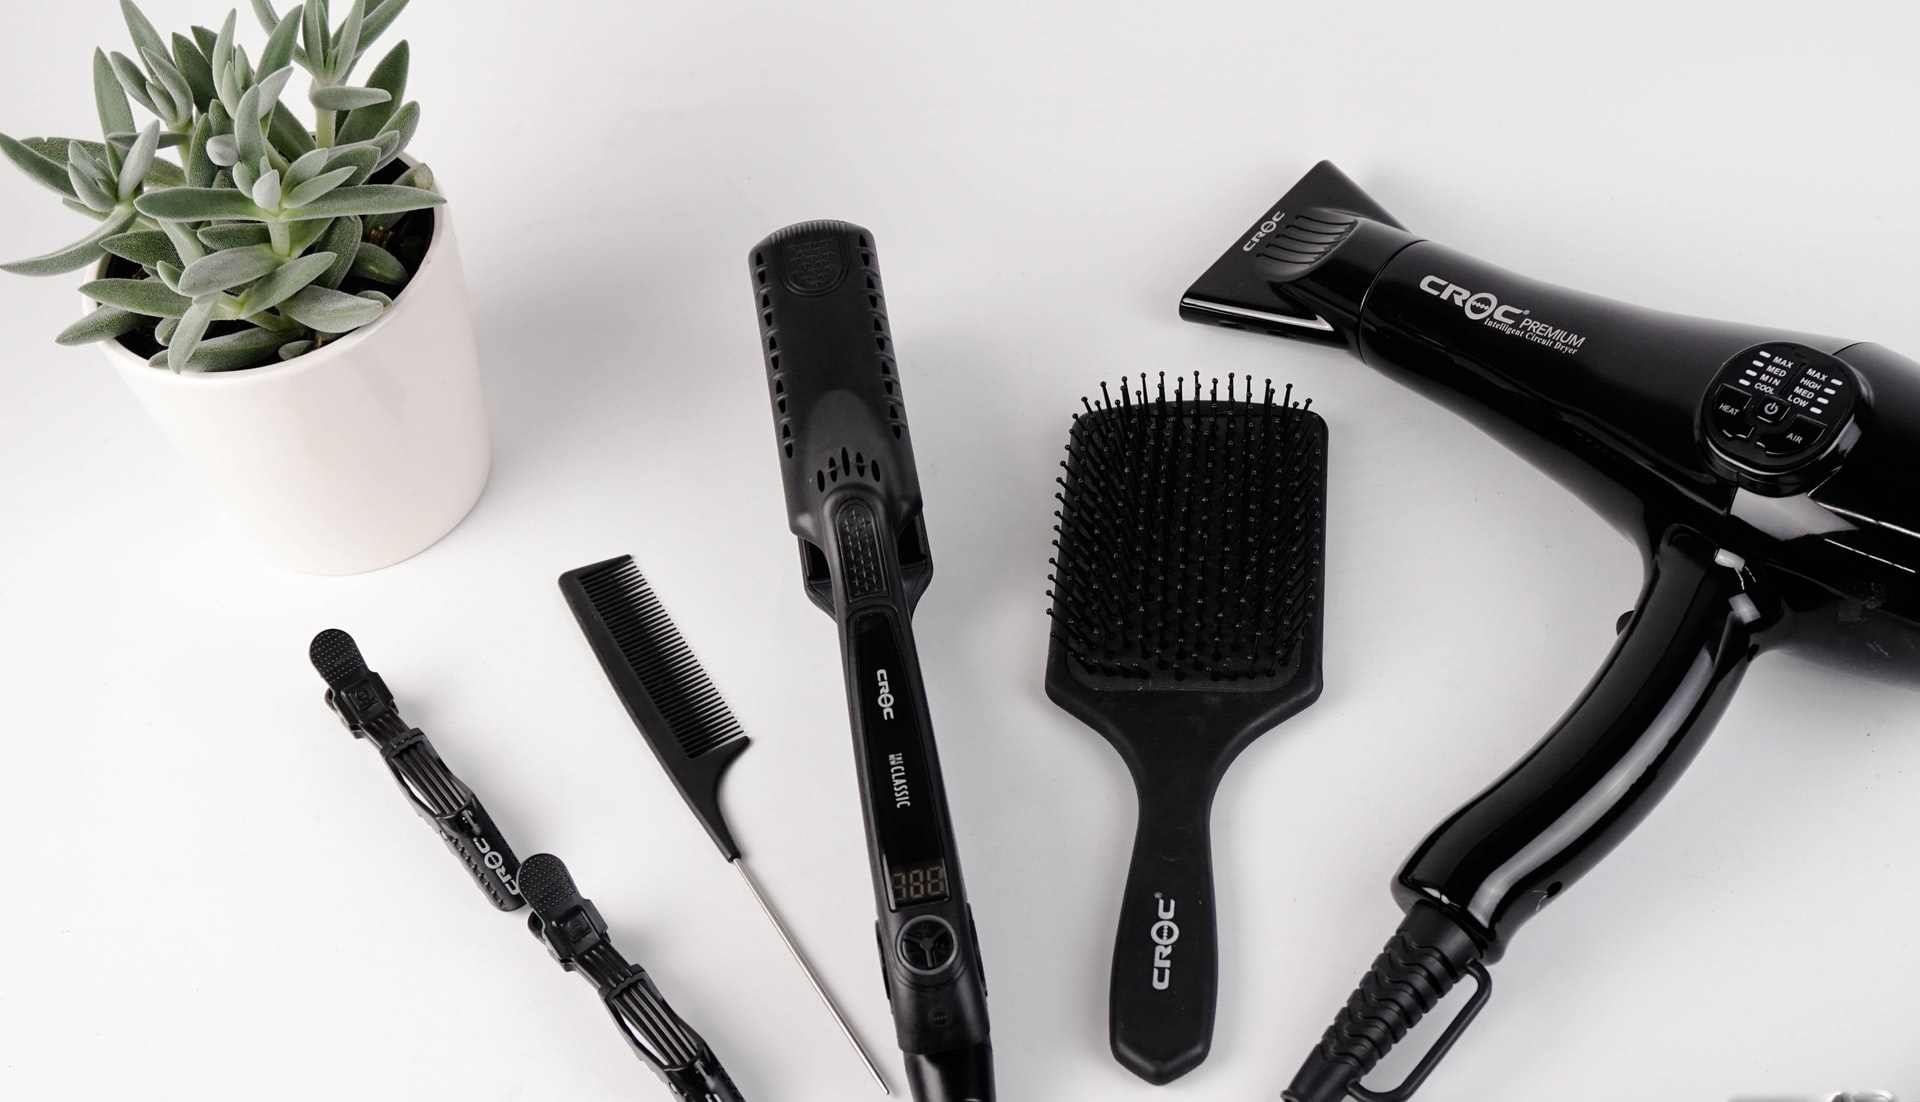 Top 5 Hair Styling Tools That Can Make You Look Like A Diva